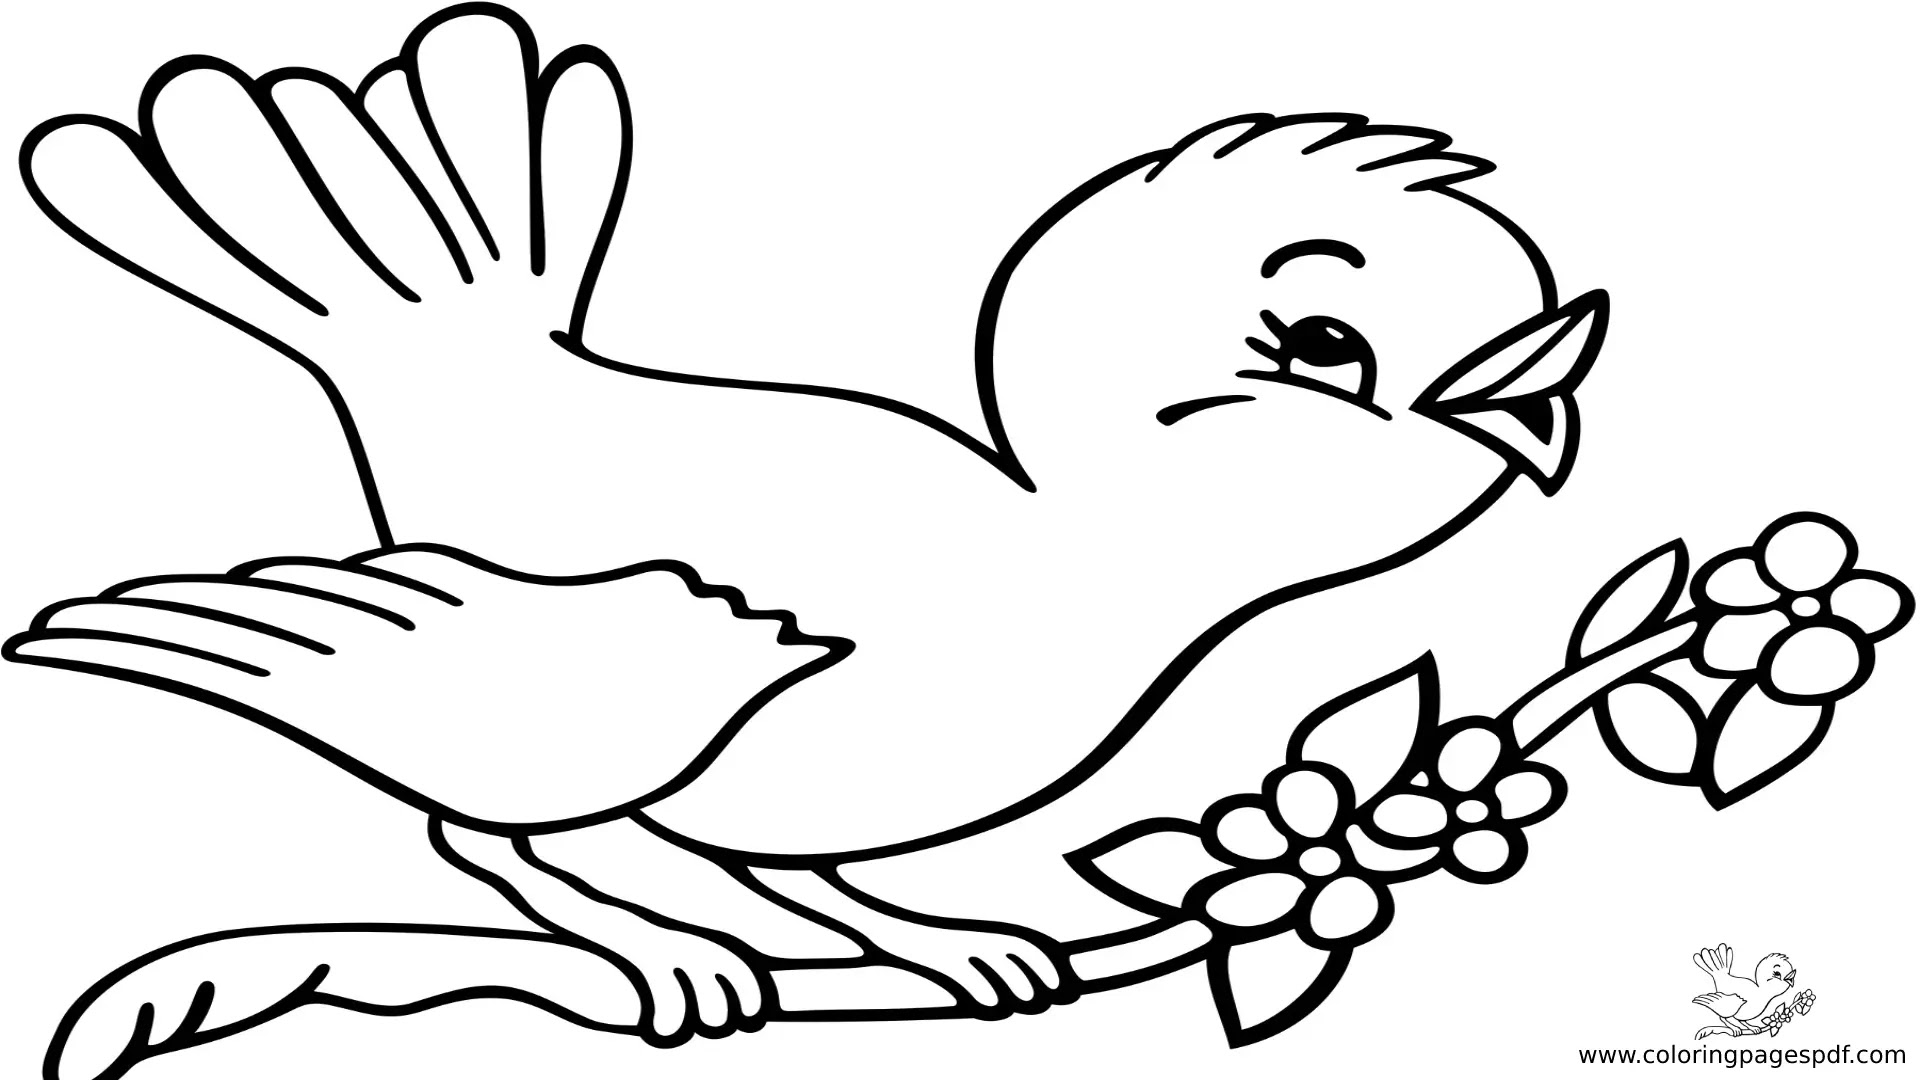 the snow's Publication Night spot bird coloring pictures to print ...